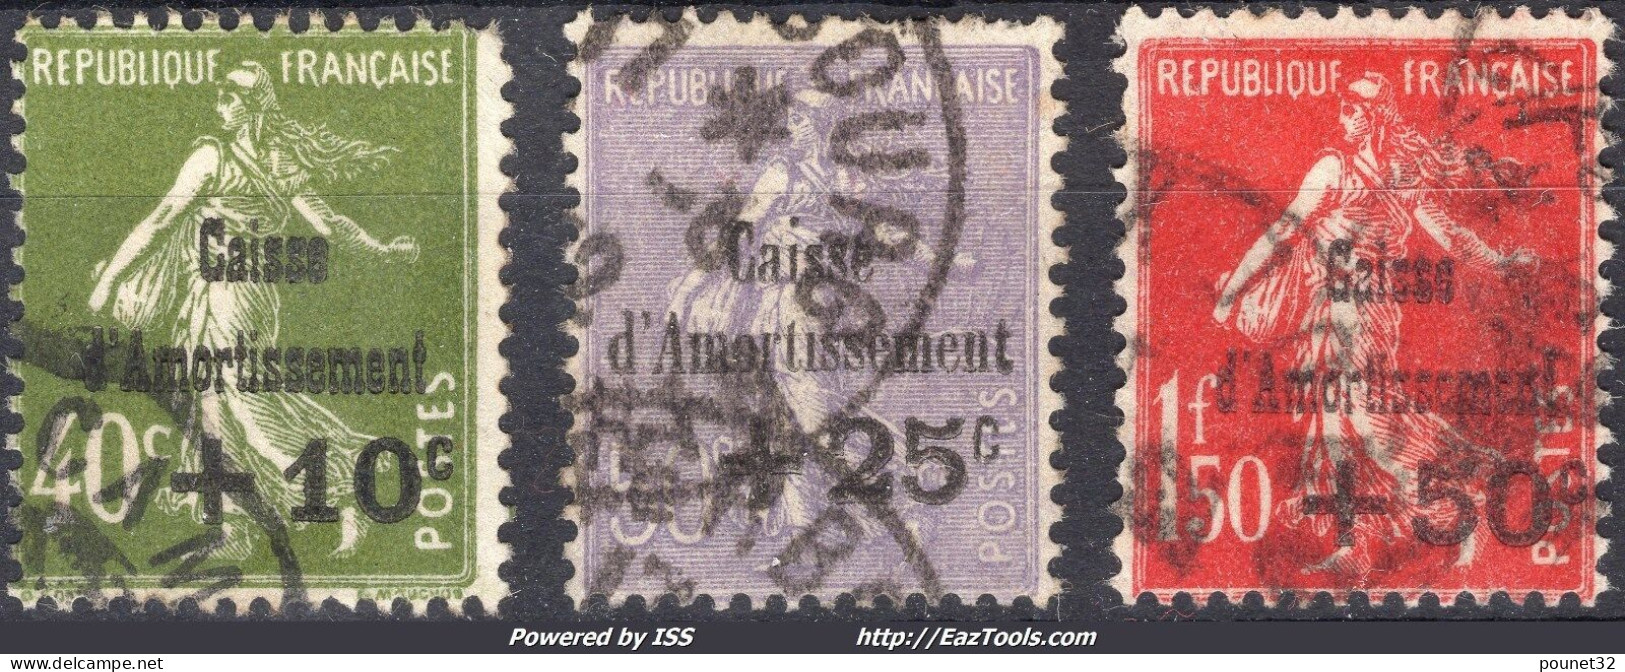 TIMBRE FRANCE SEMEUSE SERIE CAISSE D'AMORTISSEMENT N° 275/277 OBLITEREE - COTE 260 € - 1927-31 Sinking Fund